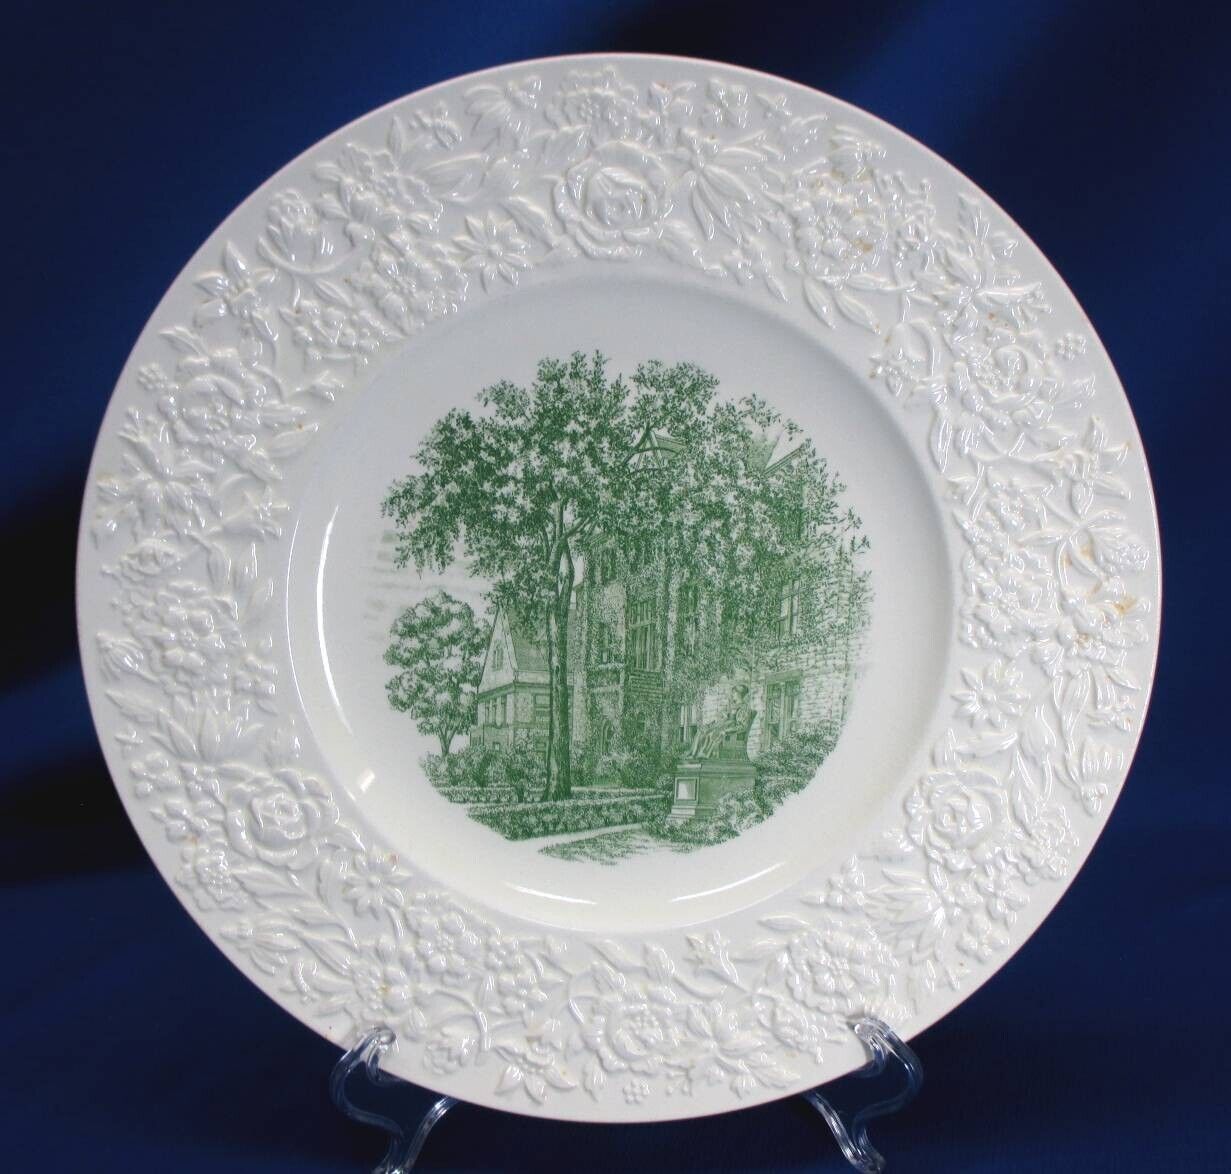 GURLEY HALL RUSSELL SAGE COLLEGE 25TH ANNIVERSARY PLATE BY WEDGWOOD